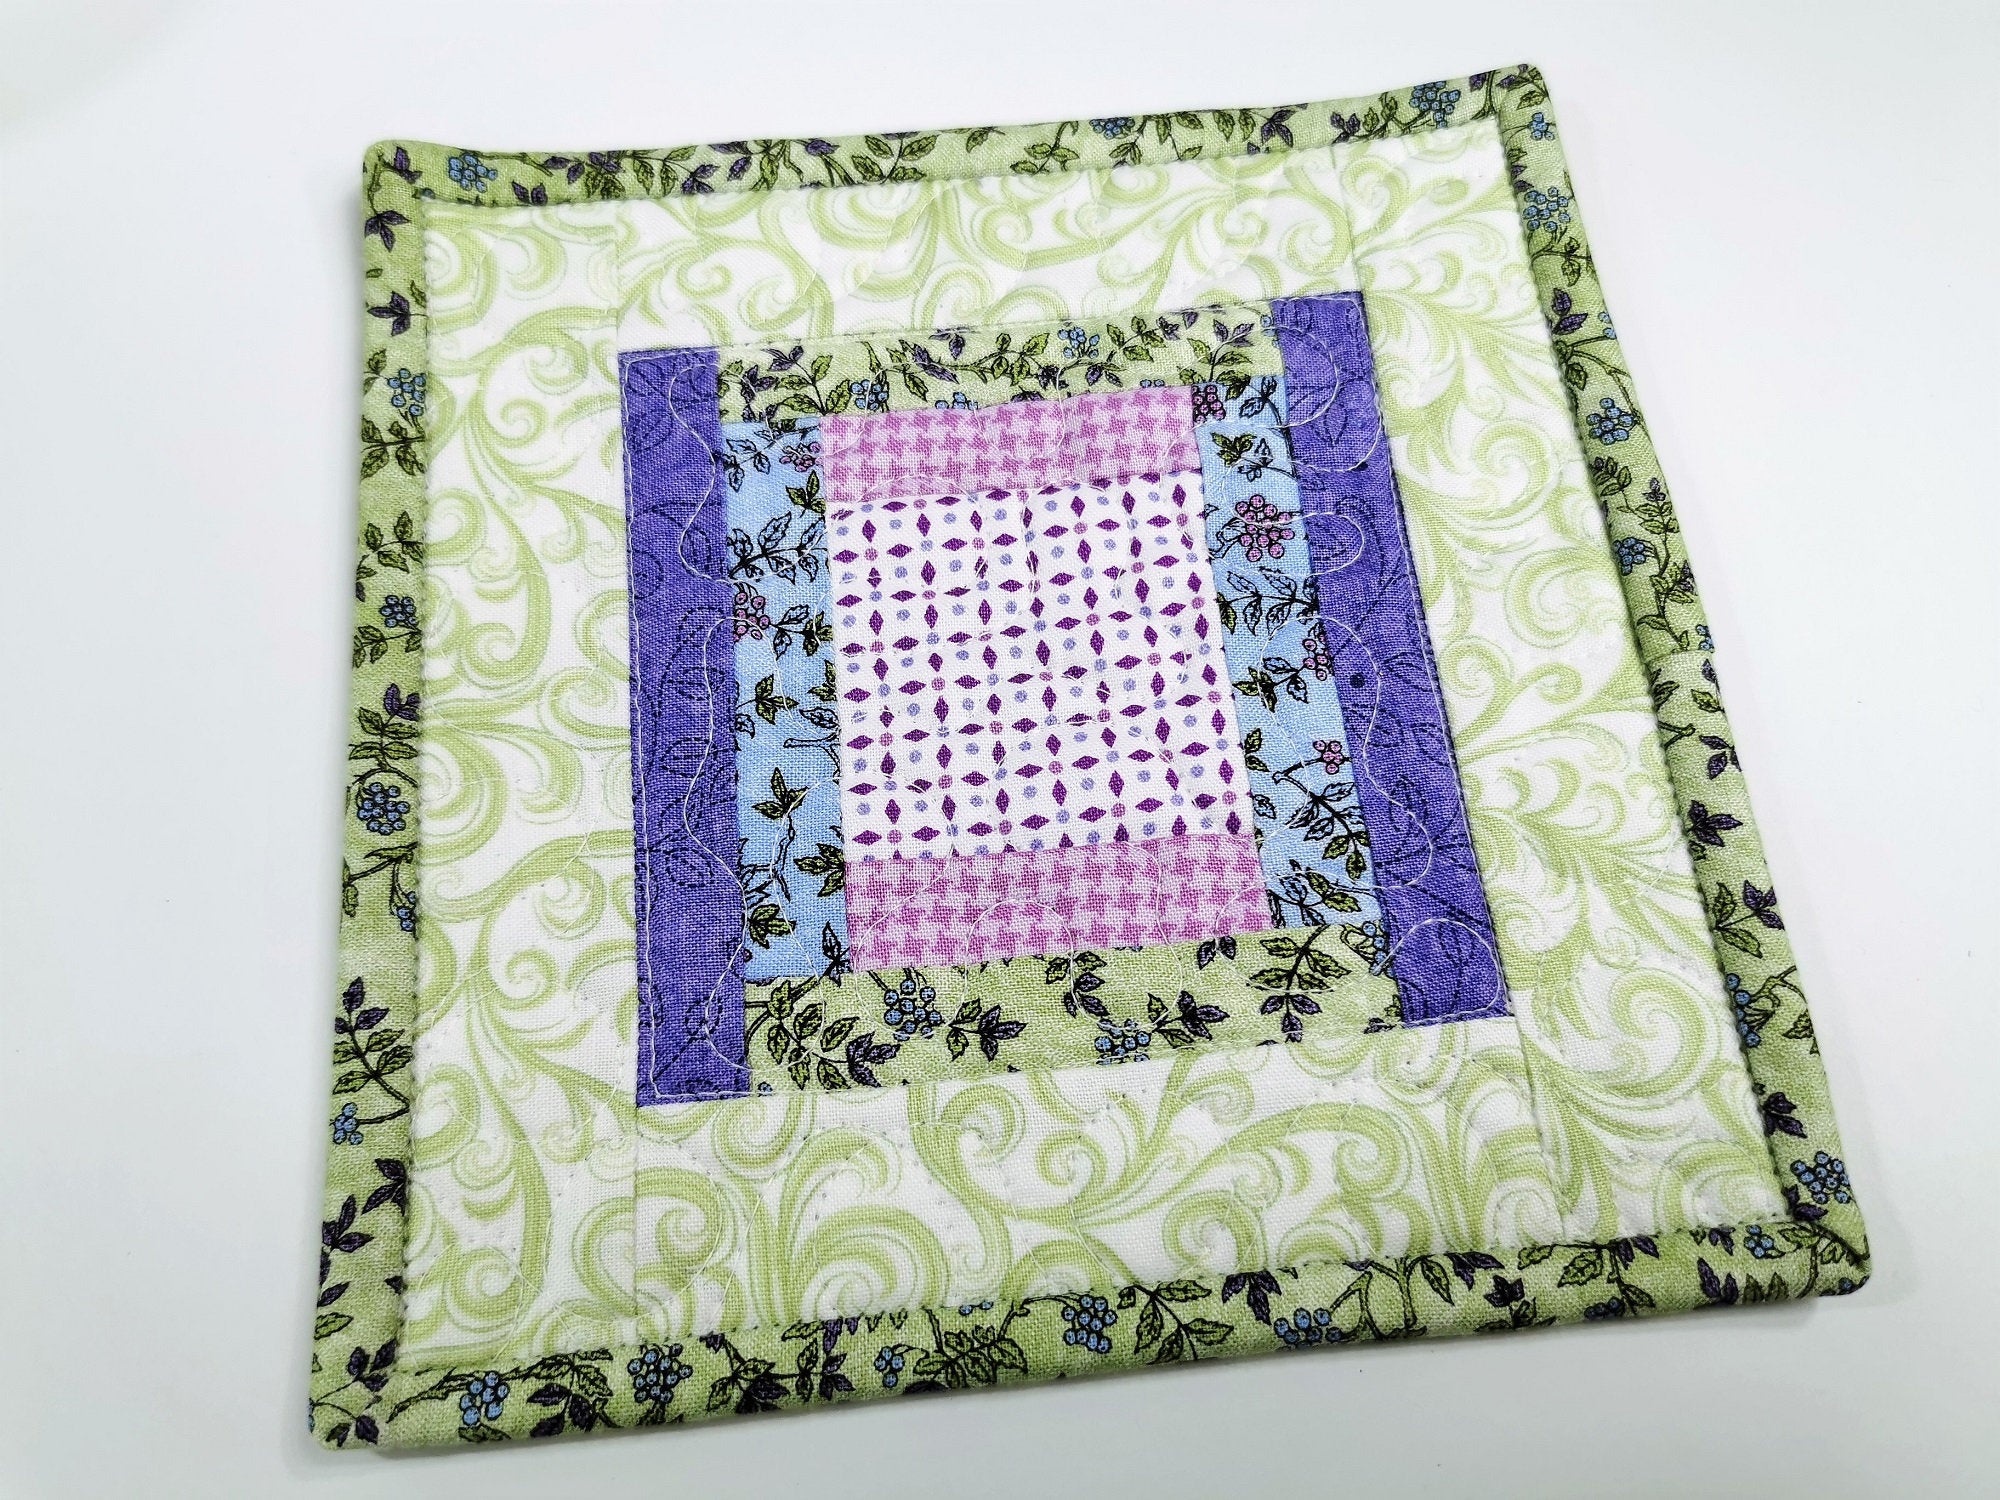 Floral Mug Rugs, Quilted Coasters